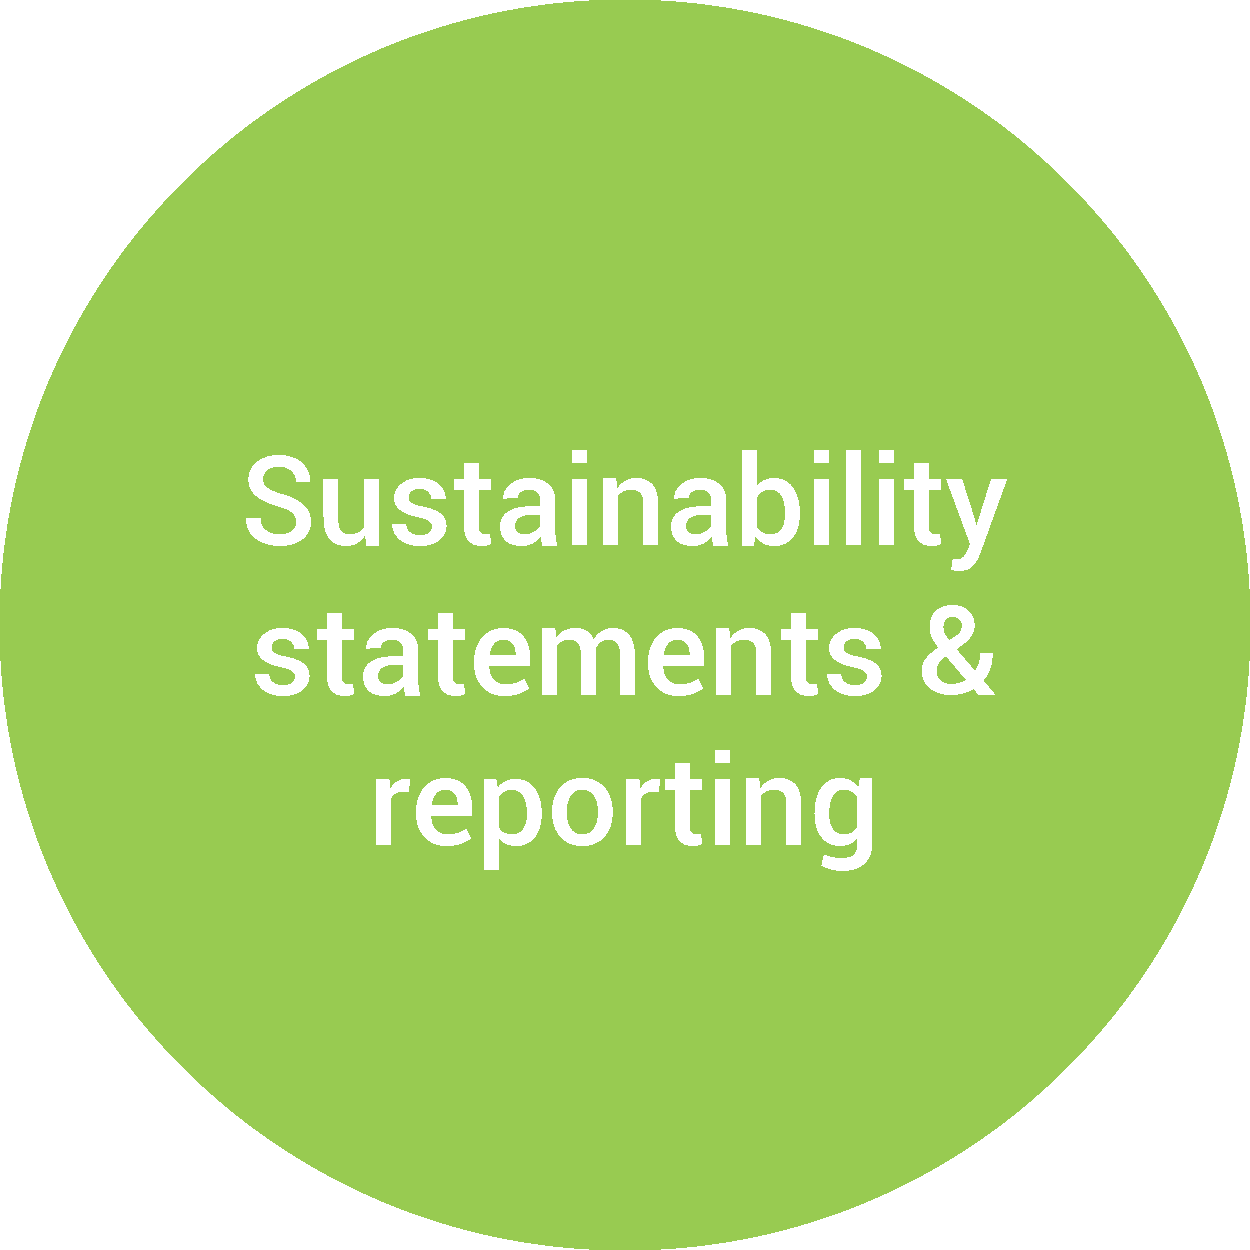 Sustainability statements and reporting